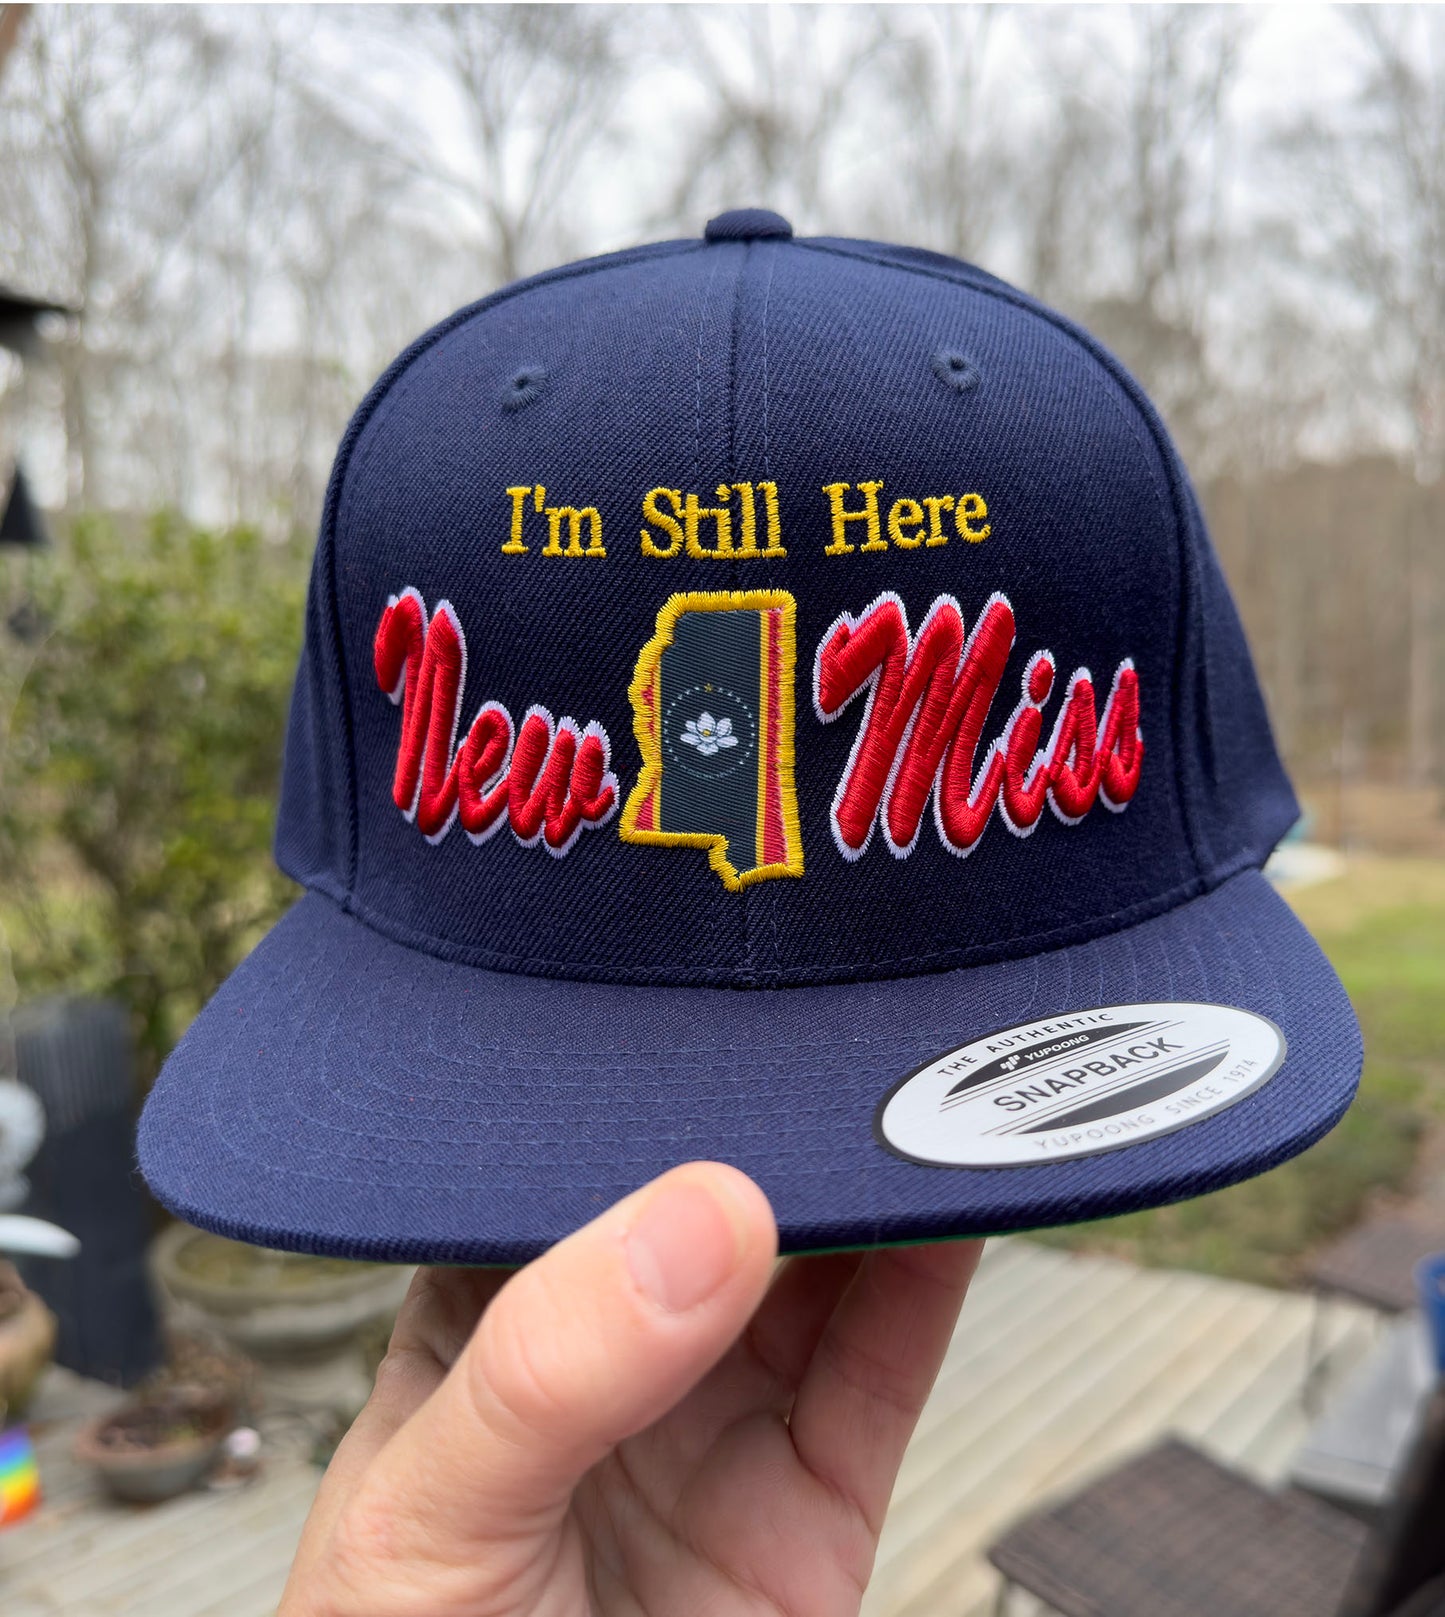 **New** " I'm Still Here"  -Limited Edition Navy FLAT BRIM STRUCTURED Hat featuring New Miss logo and Flag cutout